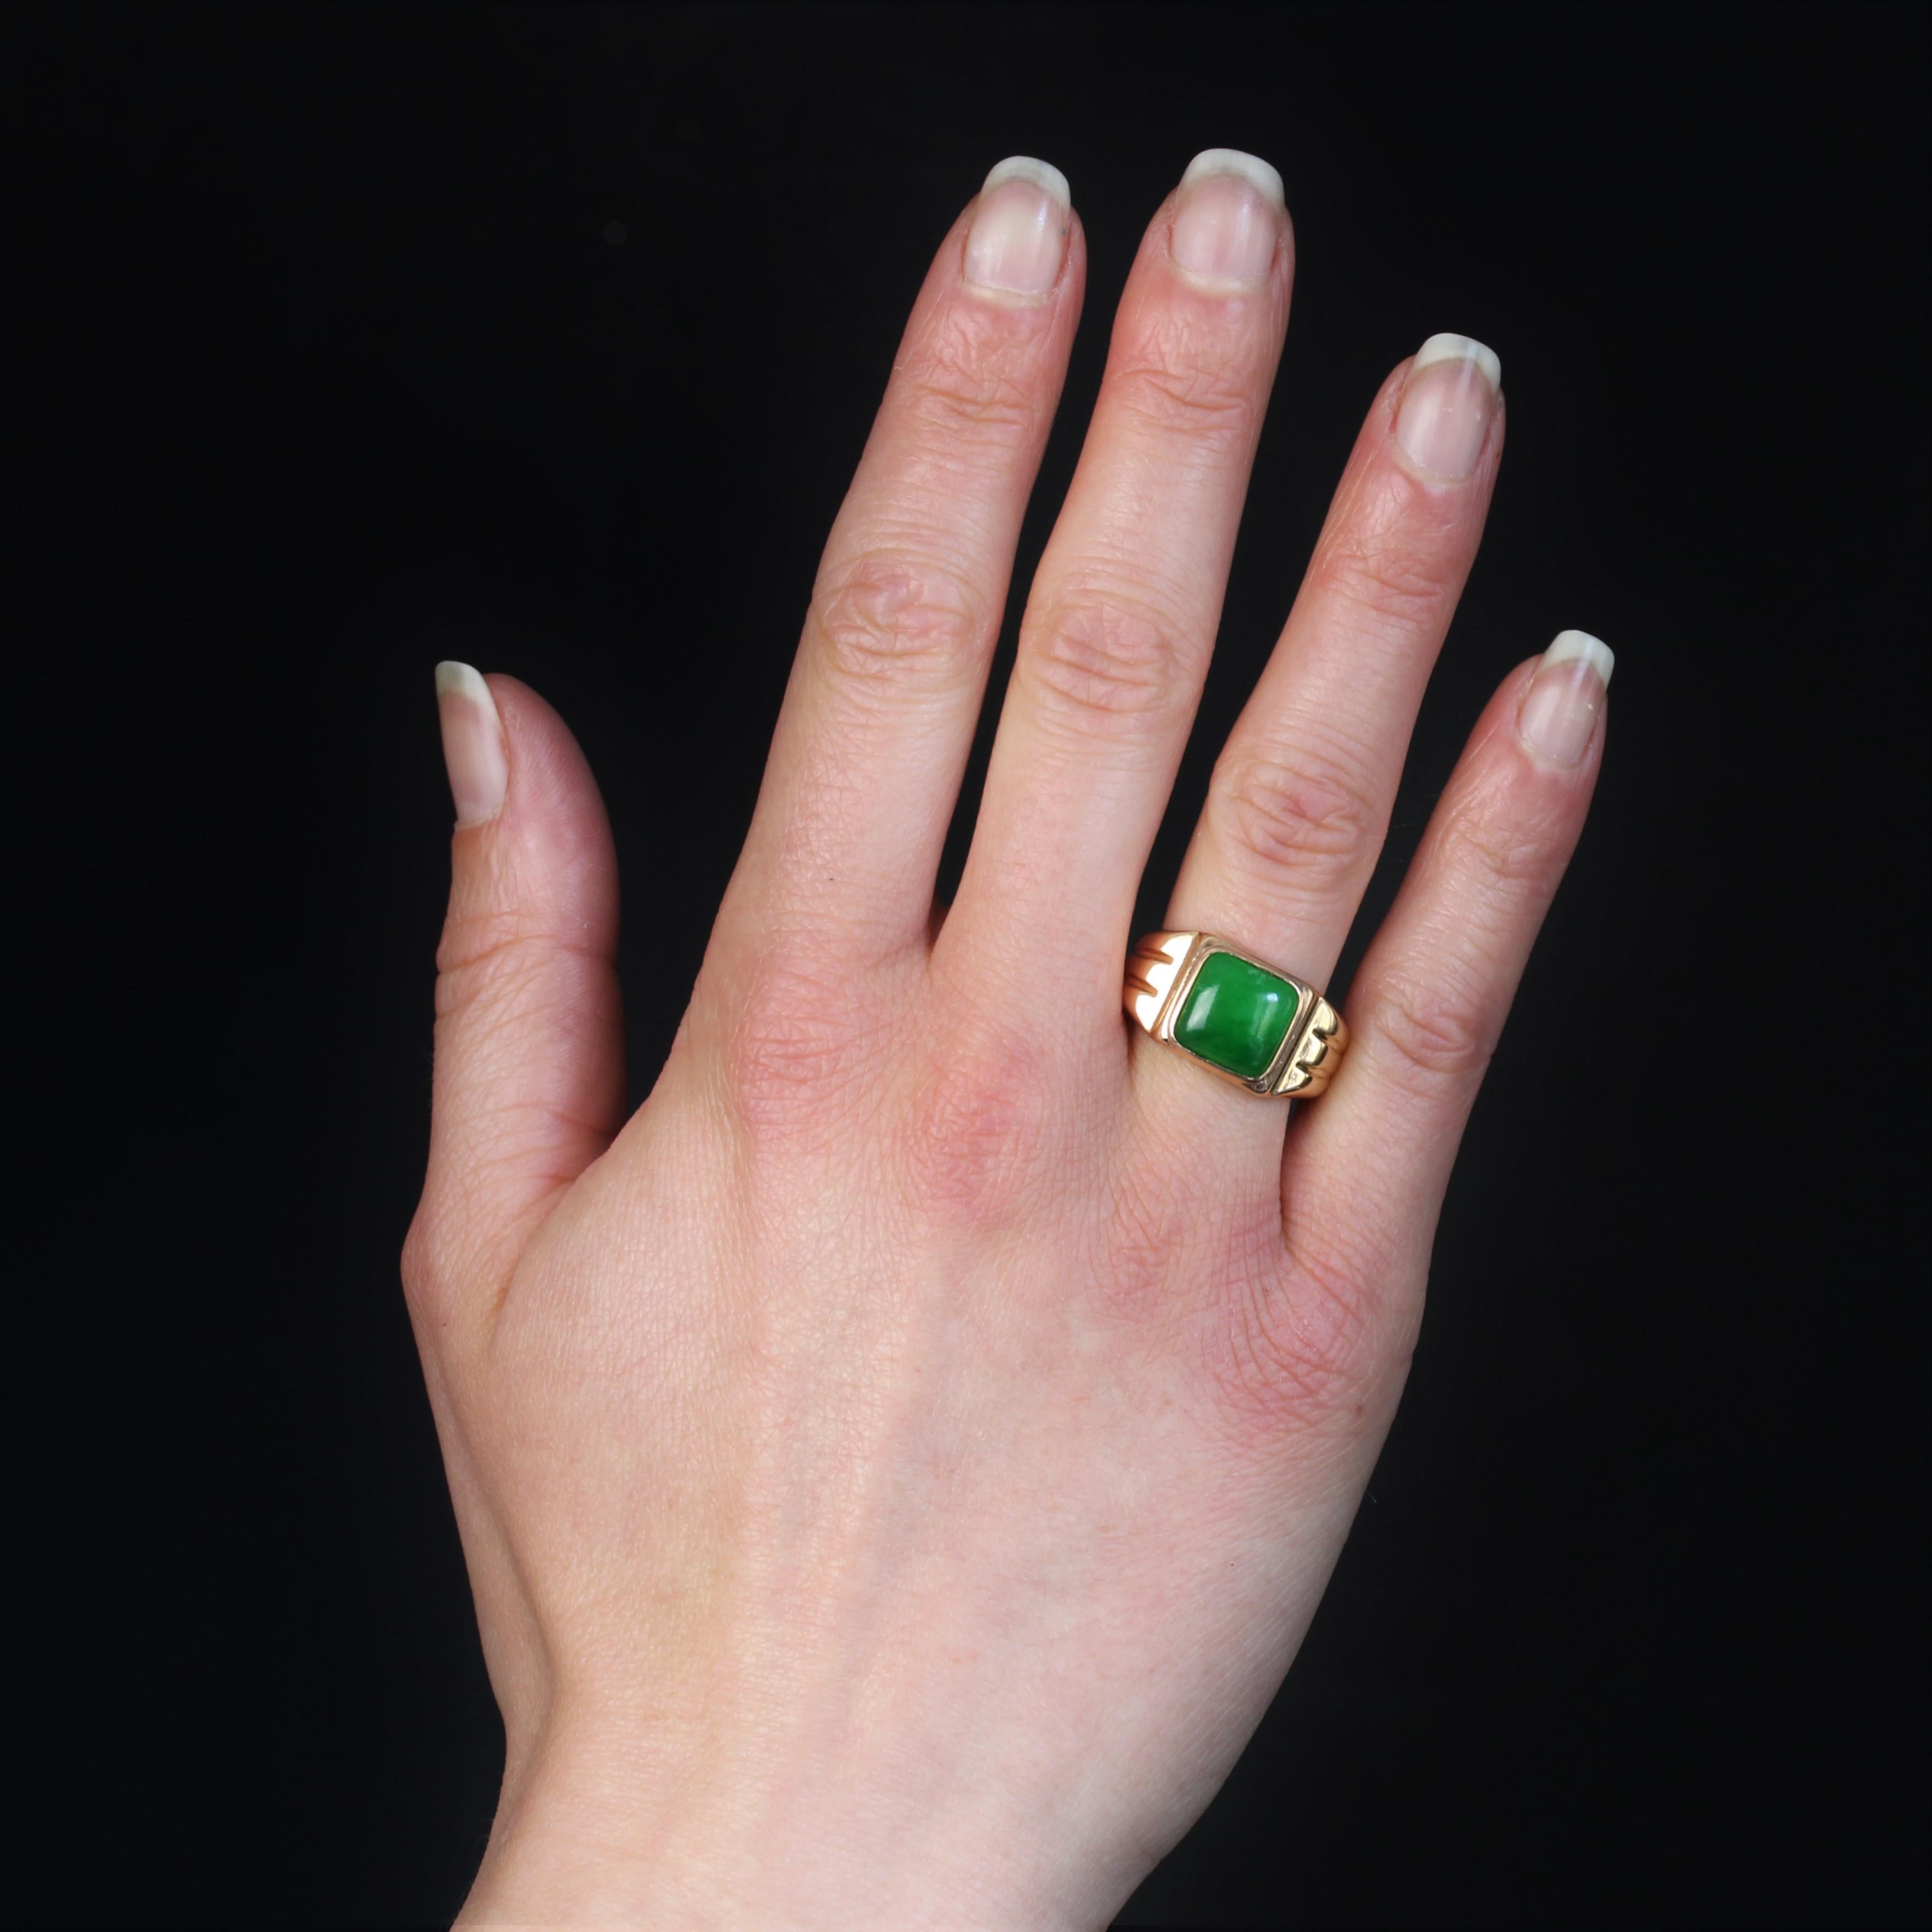 Ring in 18 karat yellow gold.
Splendid gold signet ring, its mounting is gadrooned on both sides on the departure of the ring and its plate of square shape holds a cabochon of jade in closed setting.
Total weight of jade : 4.30 carats. Jade from